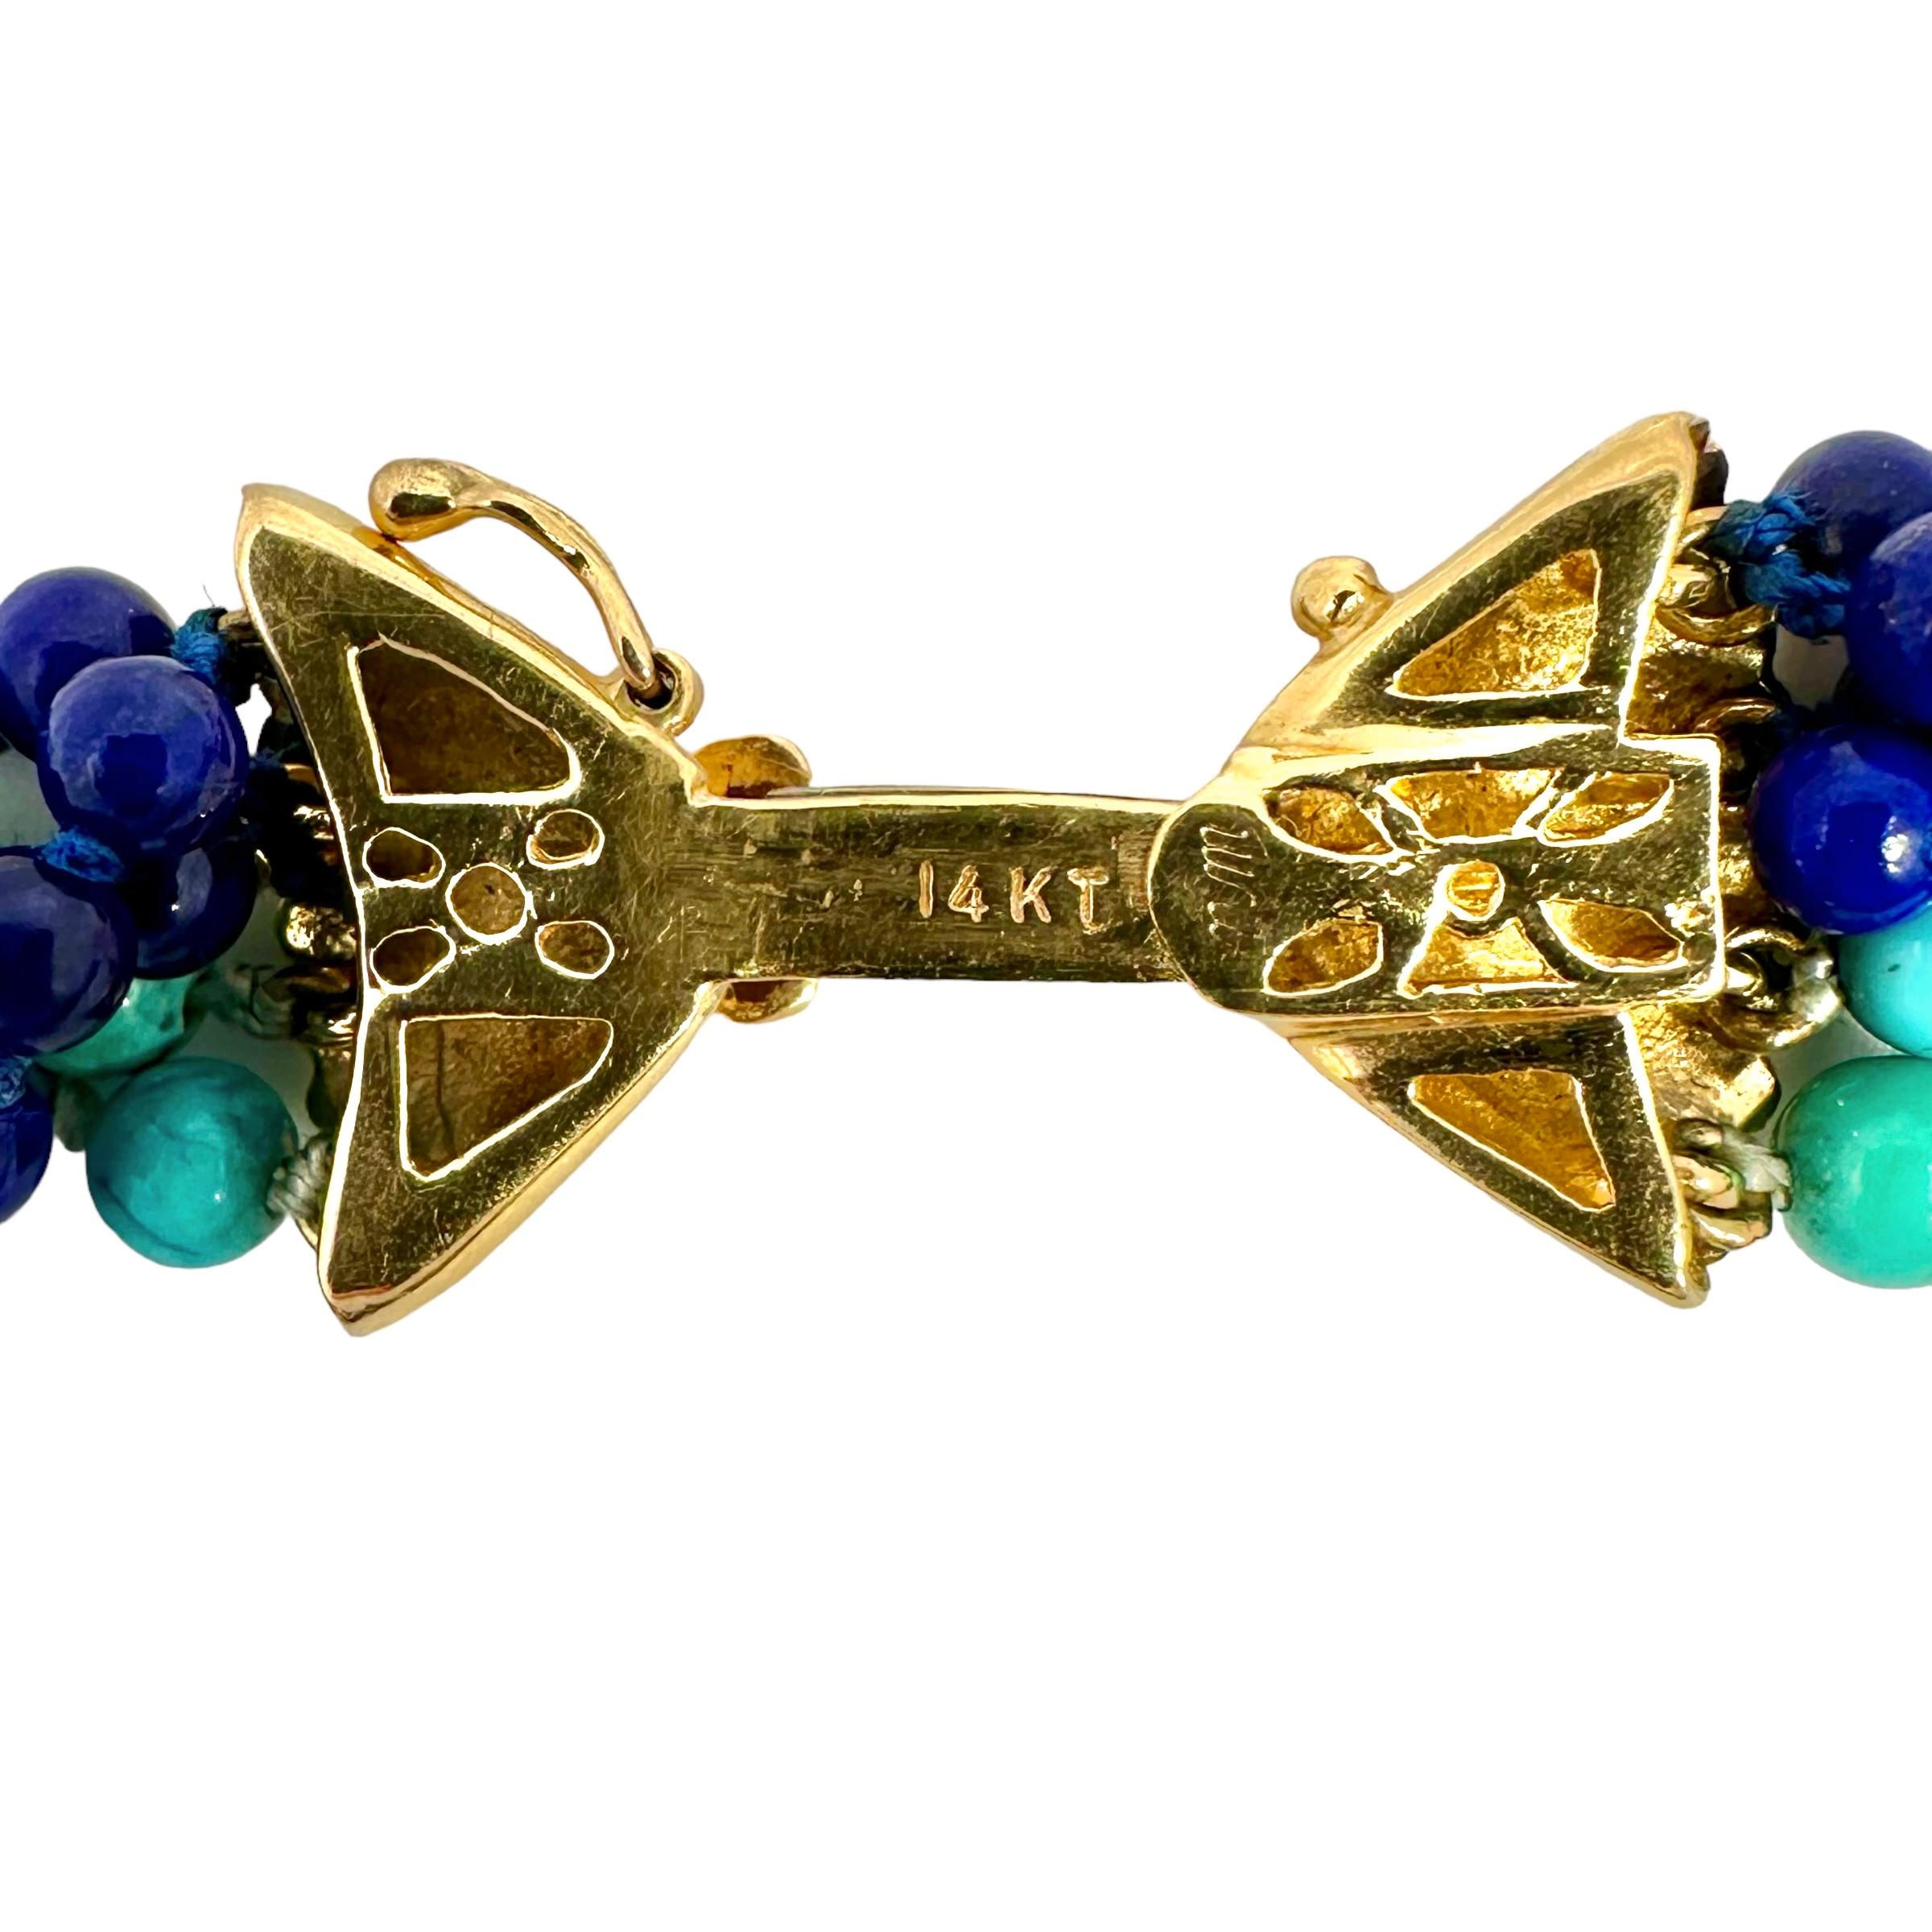 Classic Mid-20th Century Torsade Choker with Lapis, Turquoise and Gold Beads In Good Condition For Sale In Palm Beach, FL